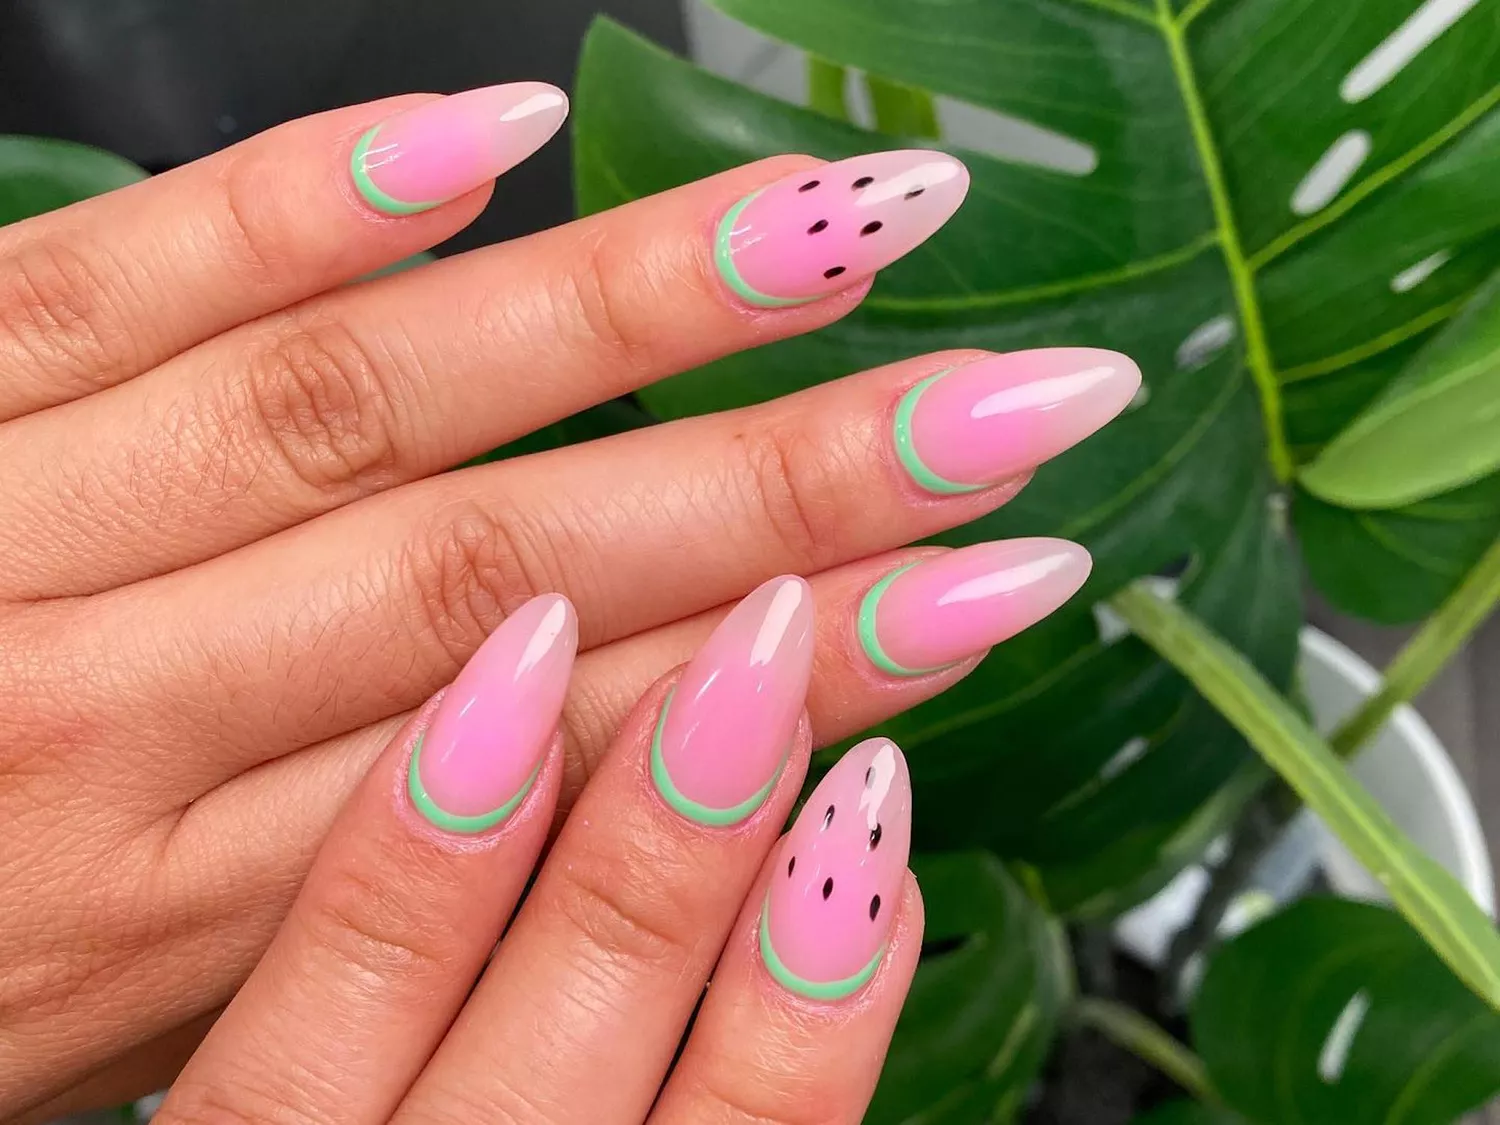 Manicure with watermelon pink base, green cuticle "rind", and black dotted seed design